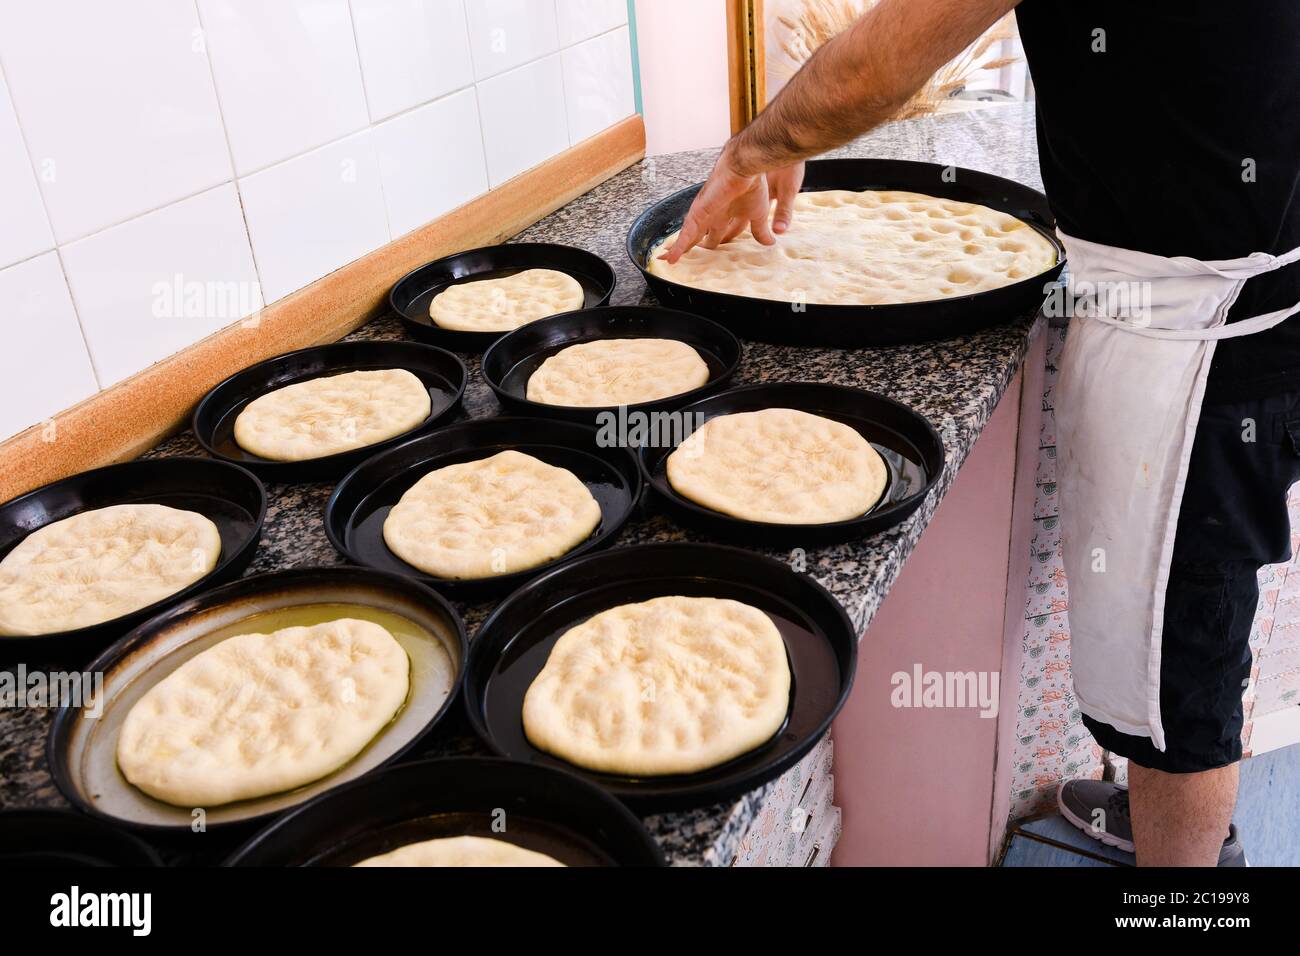 Chef stretching portions of pizza dough in individual baking trays in a pizzeria kitchen during preparation Stock Photo